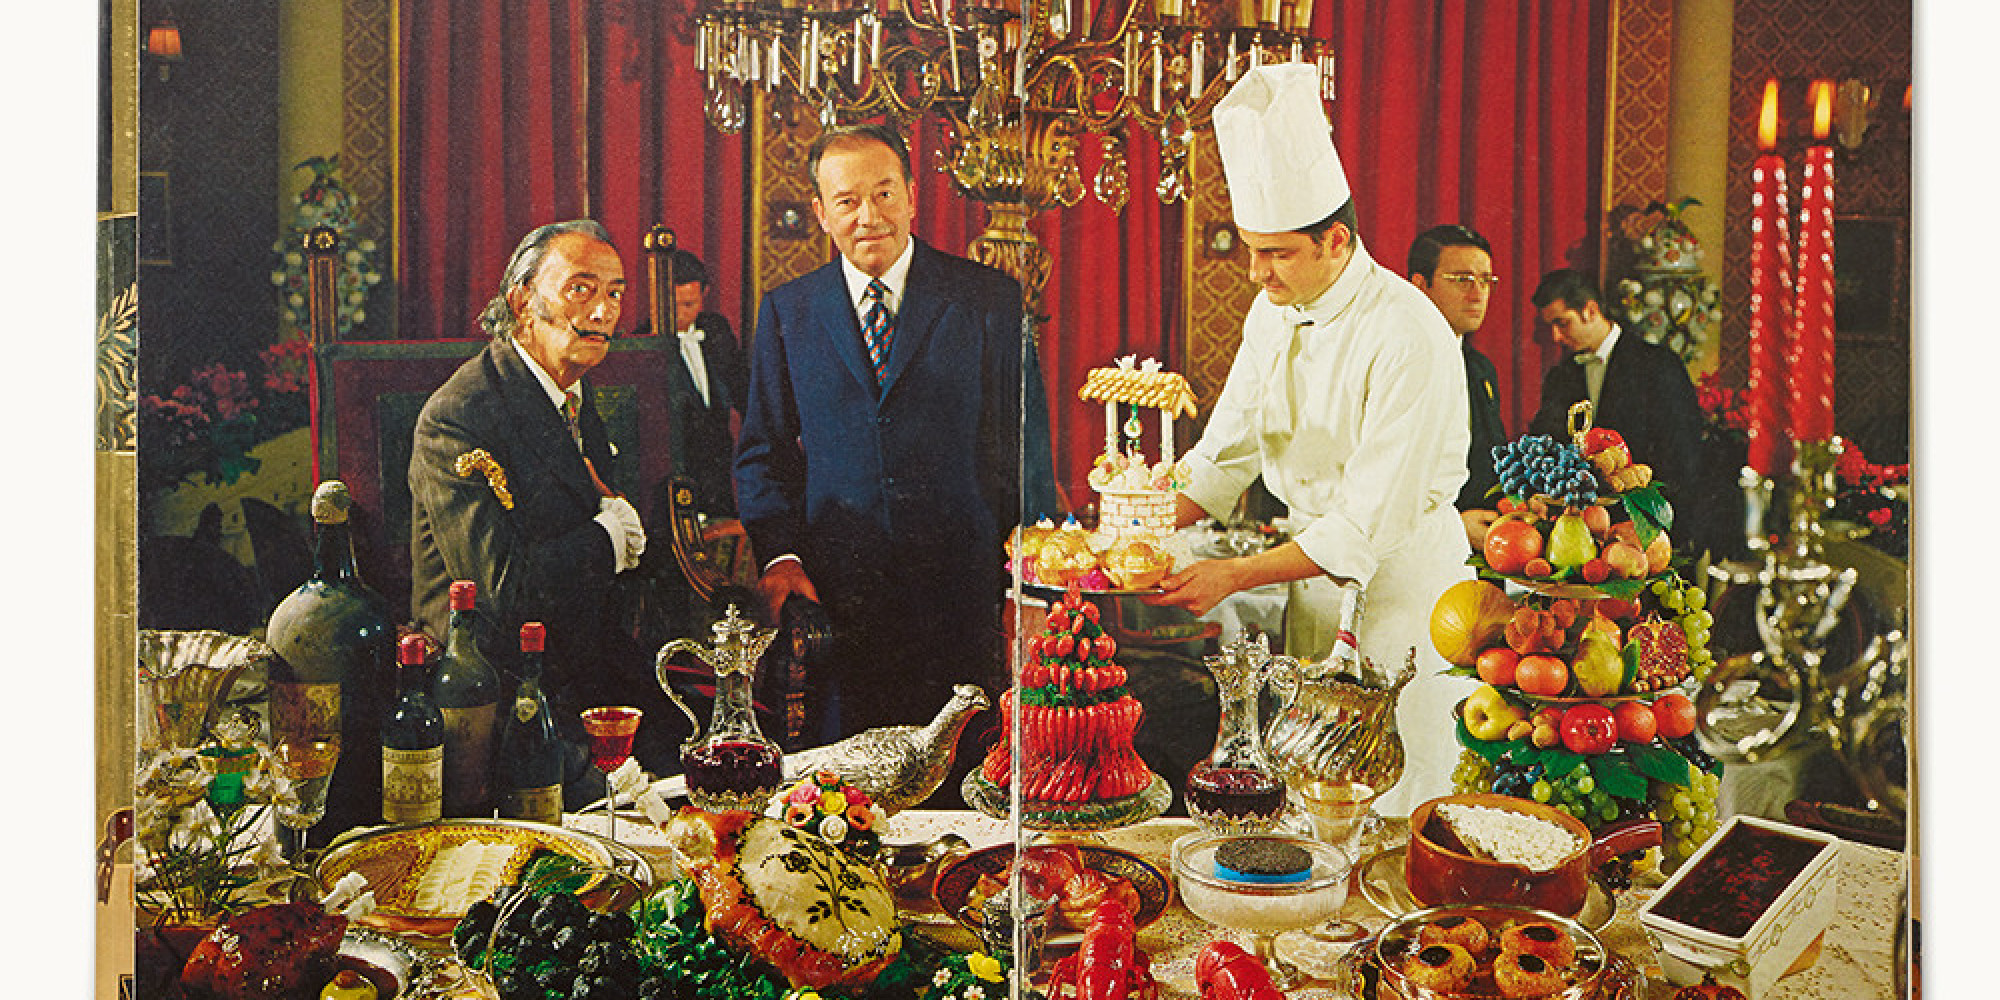 The Twisted & Erotic Cookbook by Salvador Dali “Les Diners De Gala